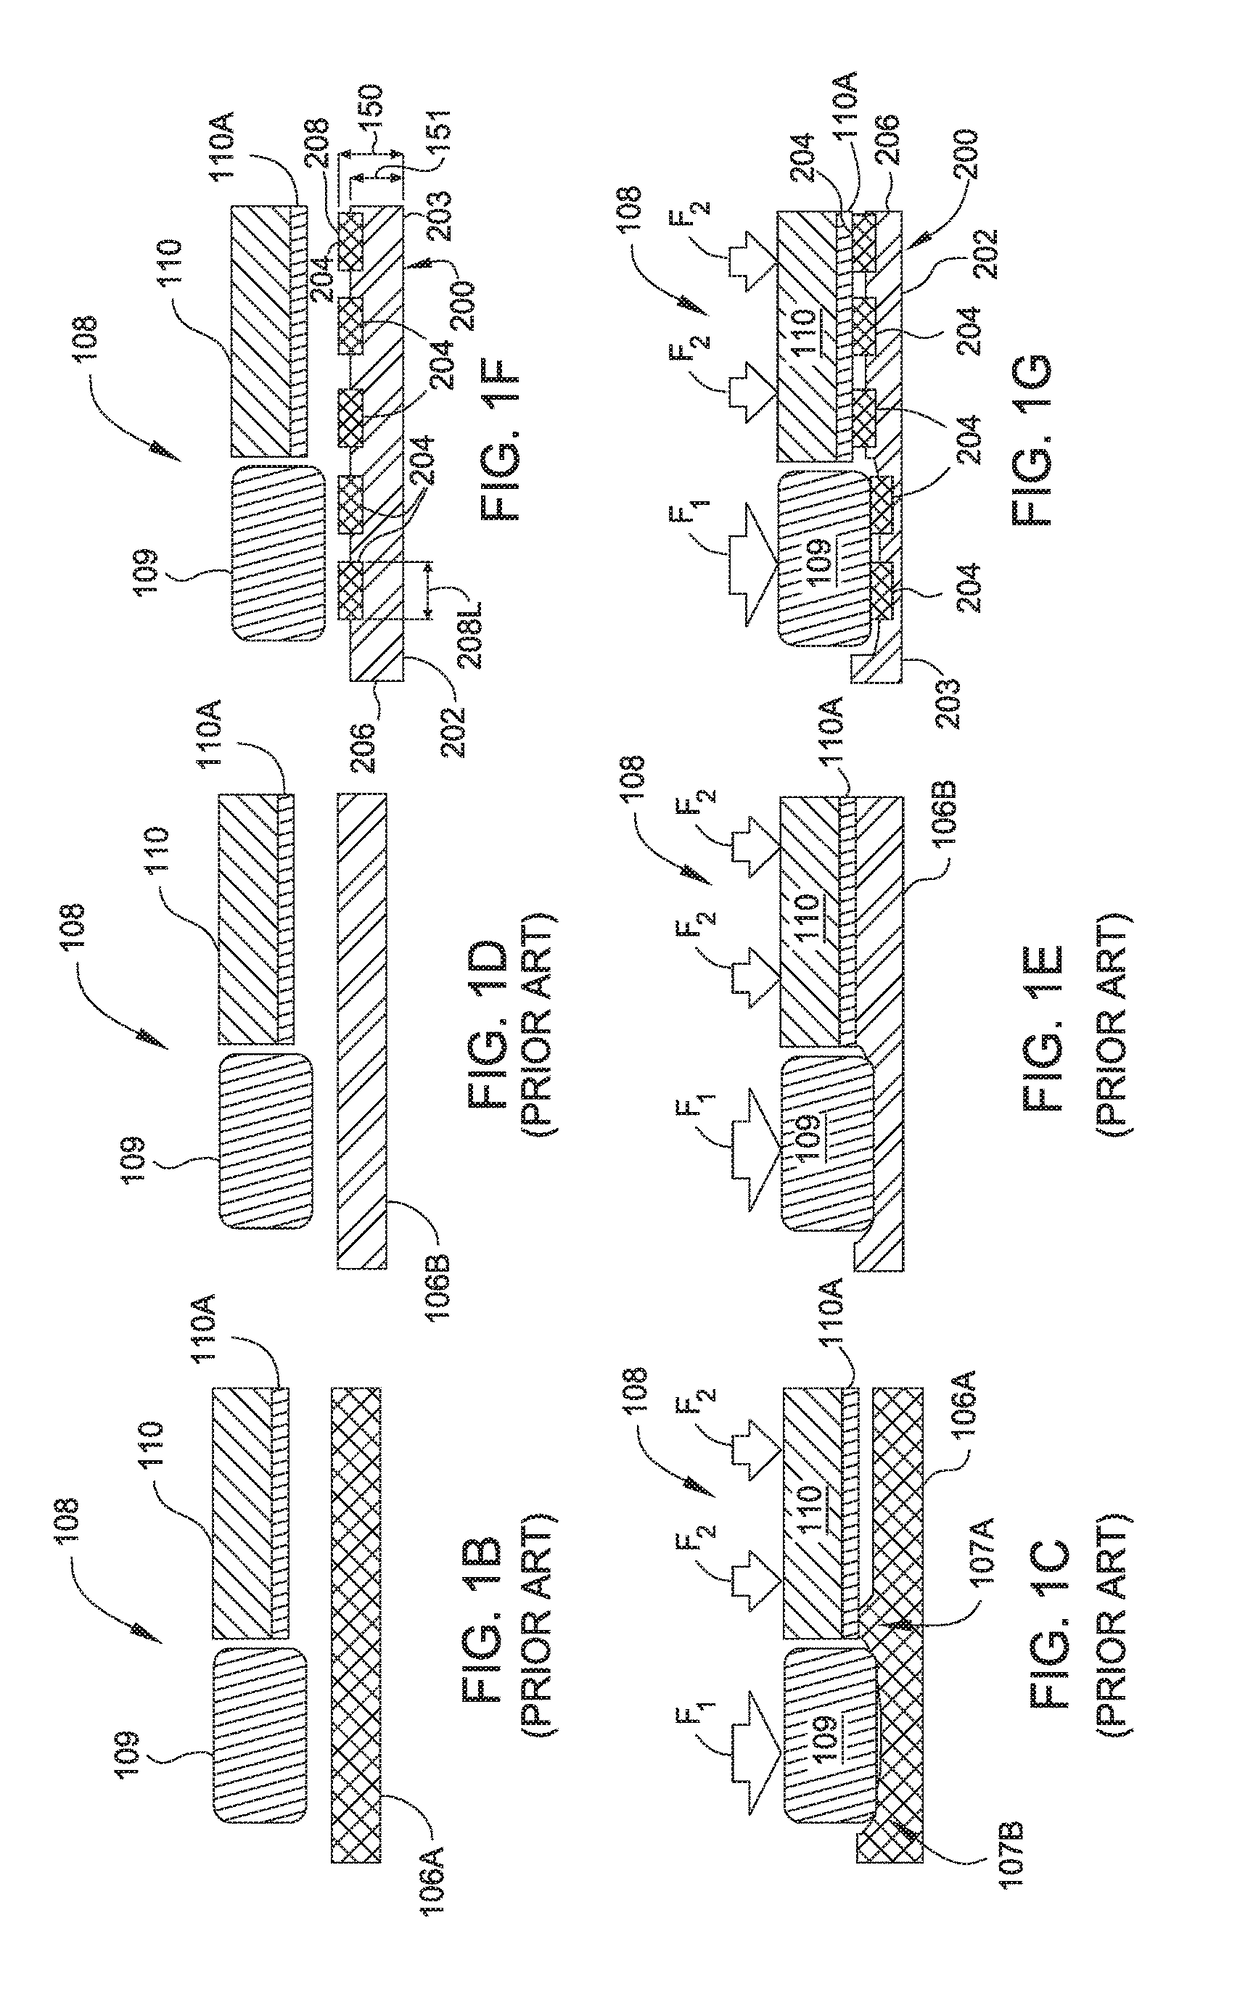 Method and apparatus for forming porous advanced polishing pads using an additive manufacturing process